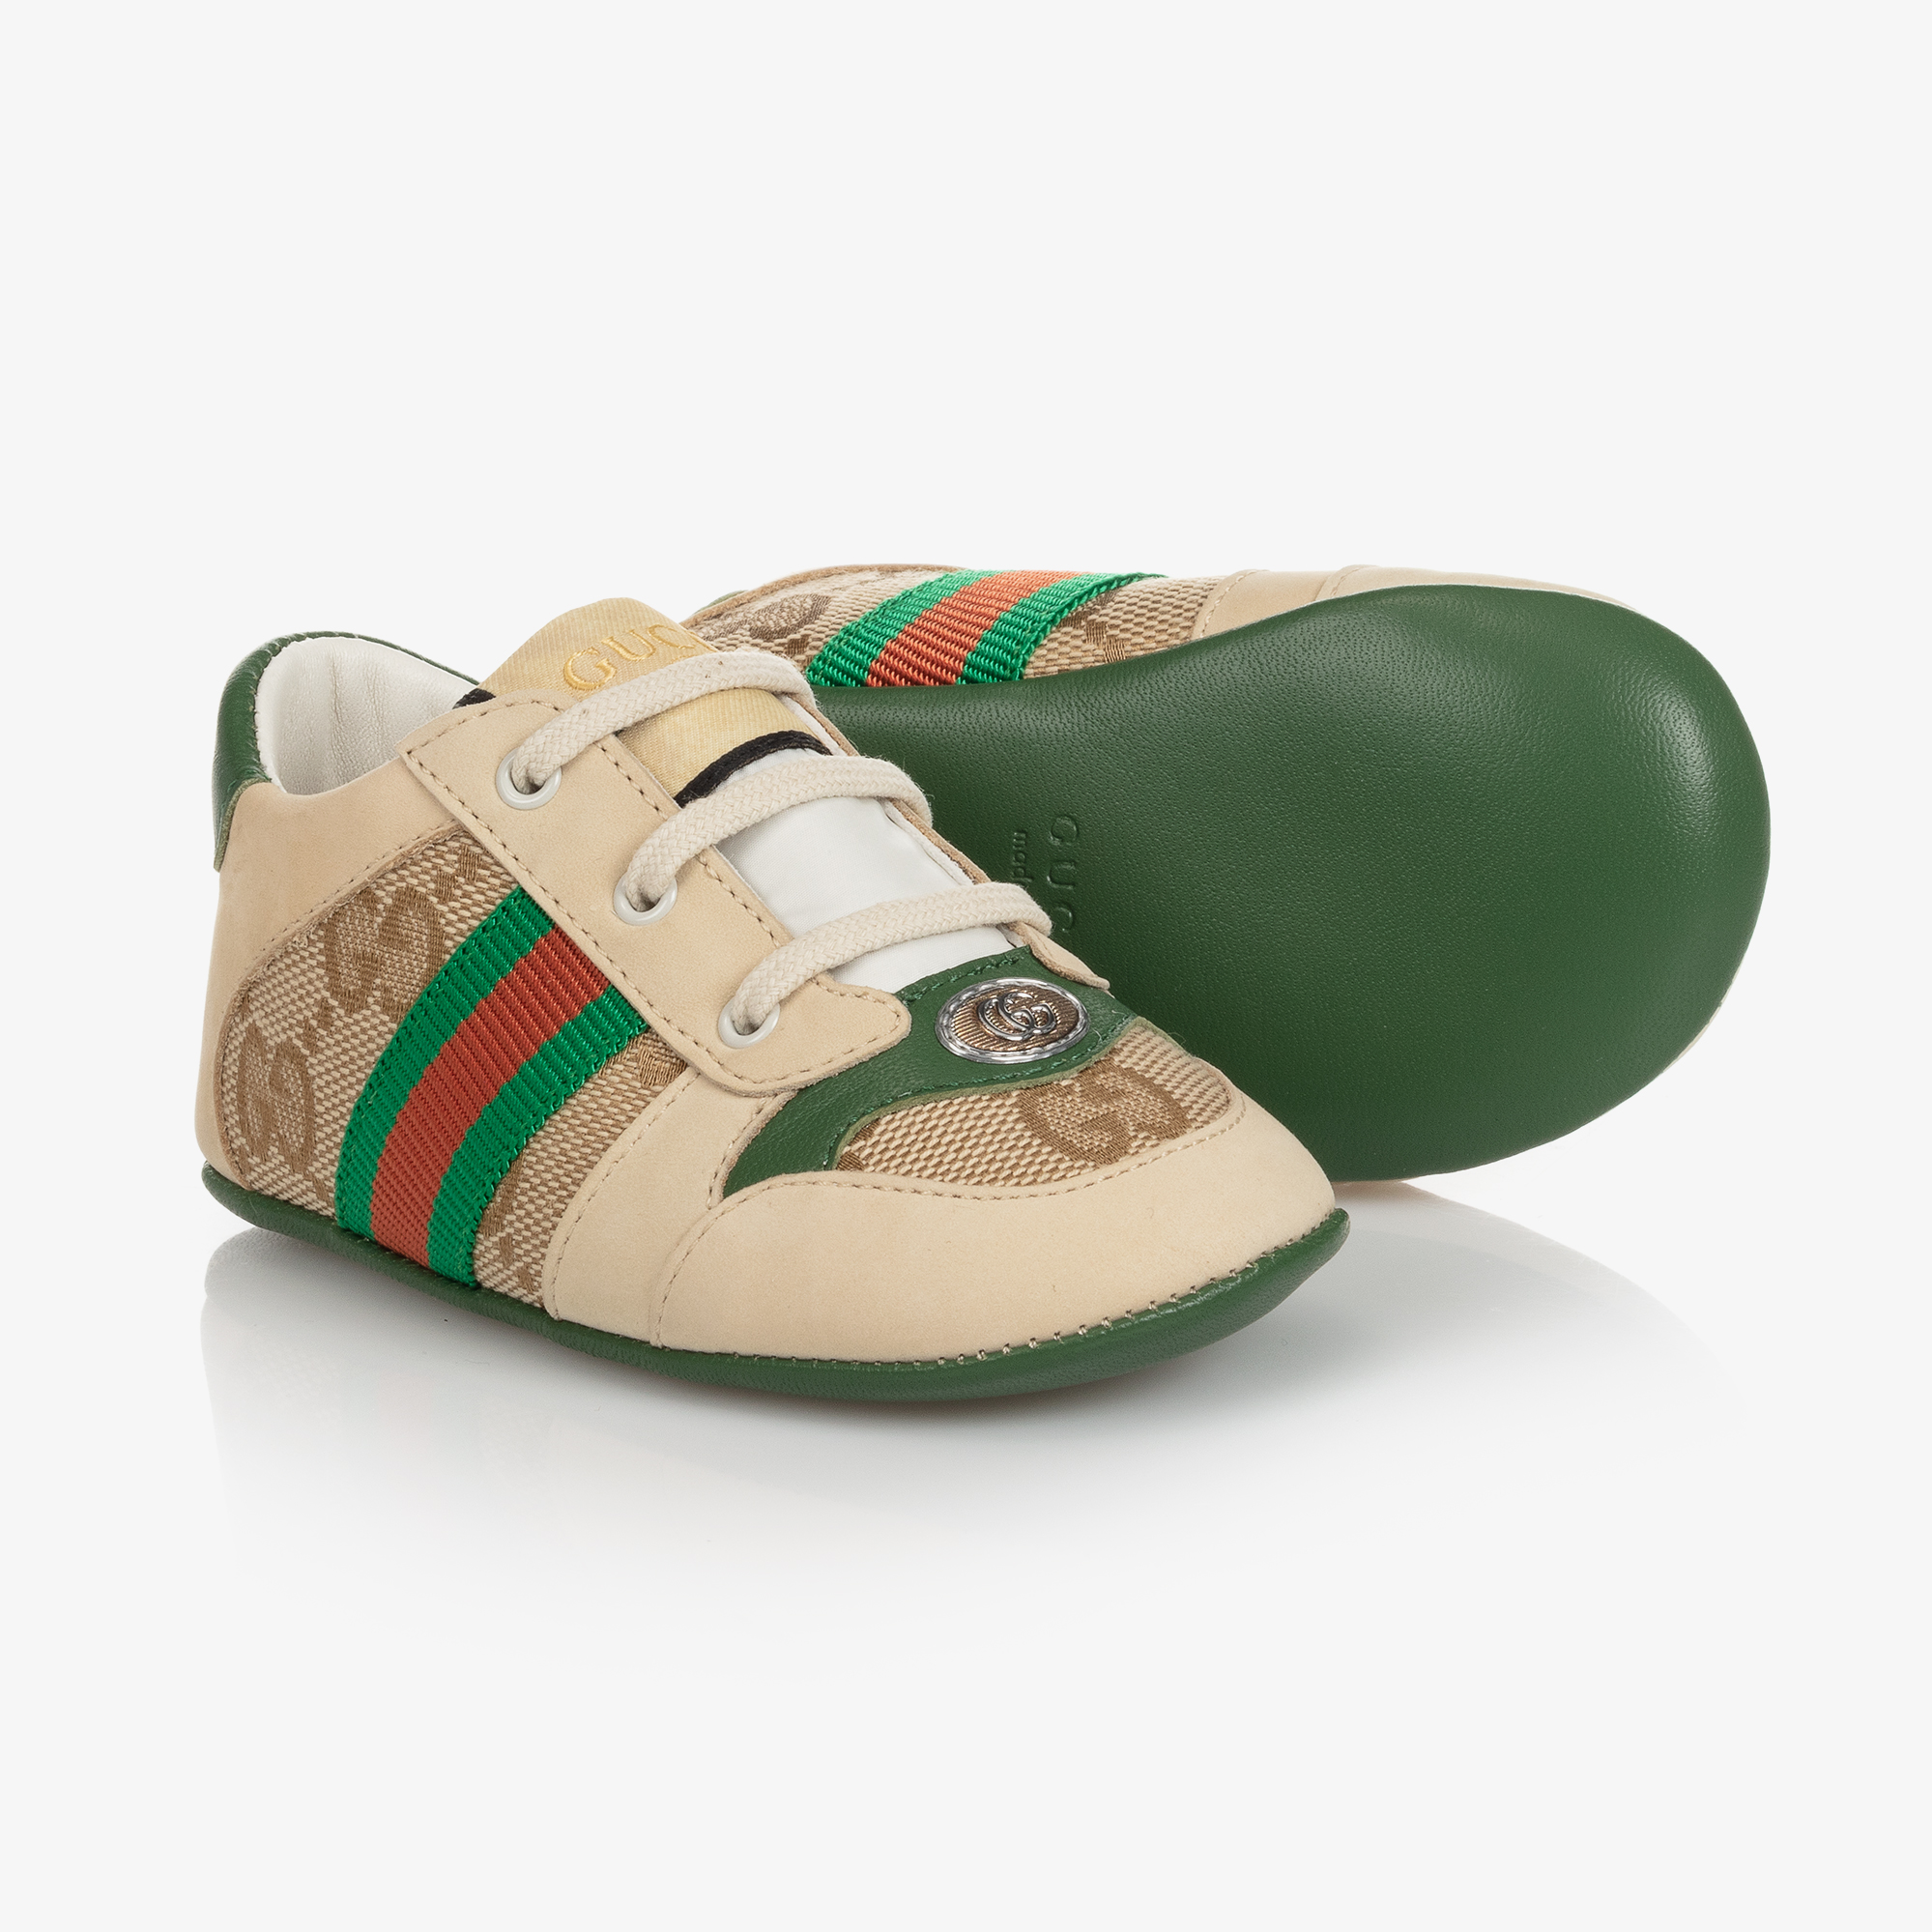 Gucci Style Baby Shoes - KidsBaron